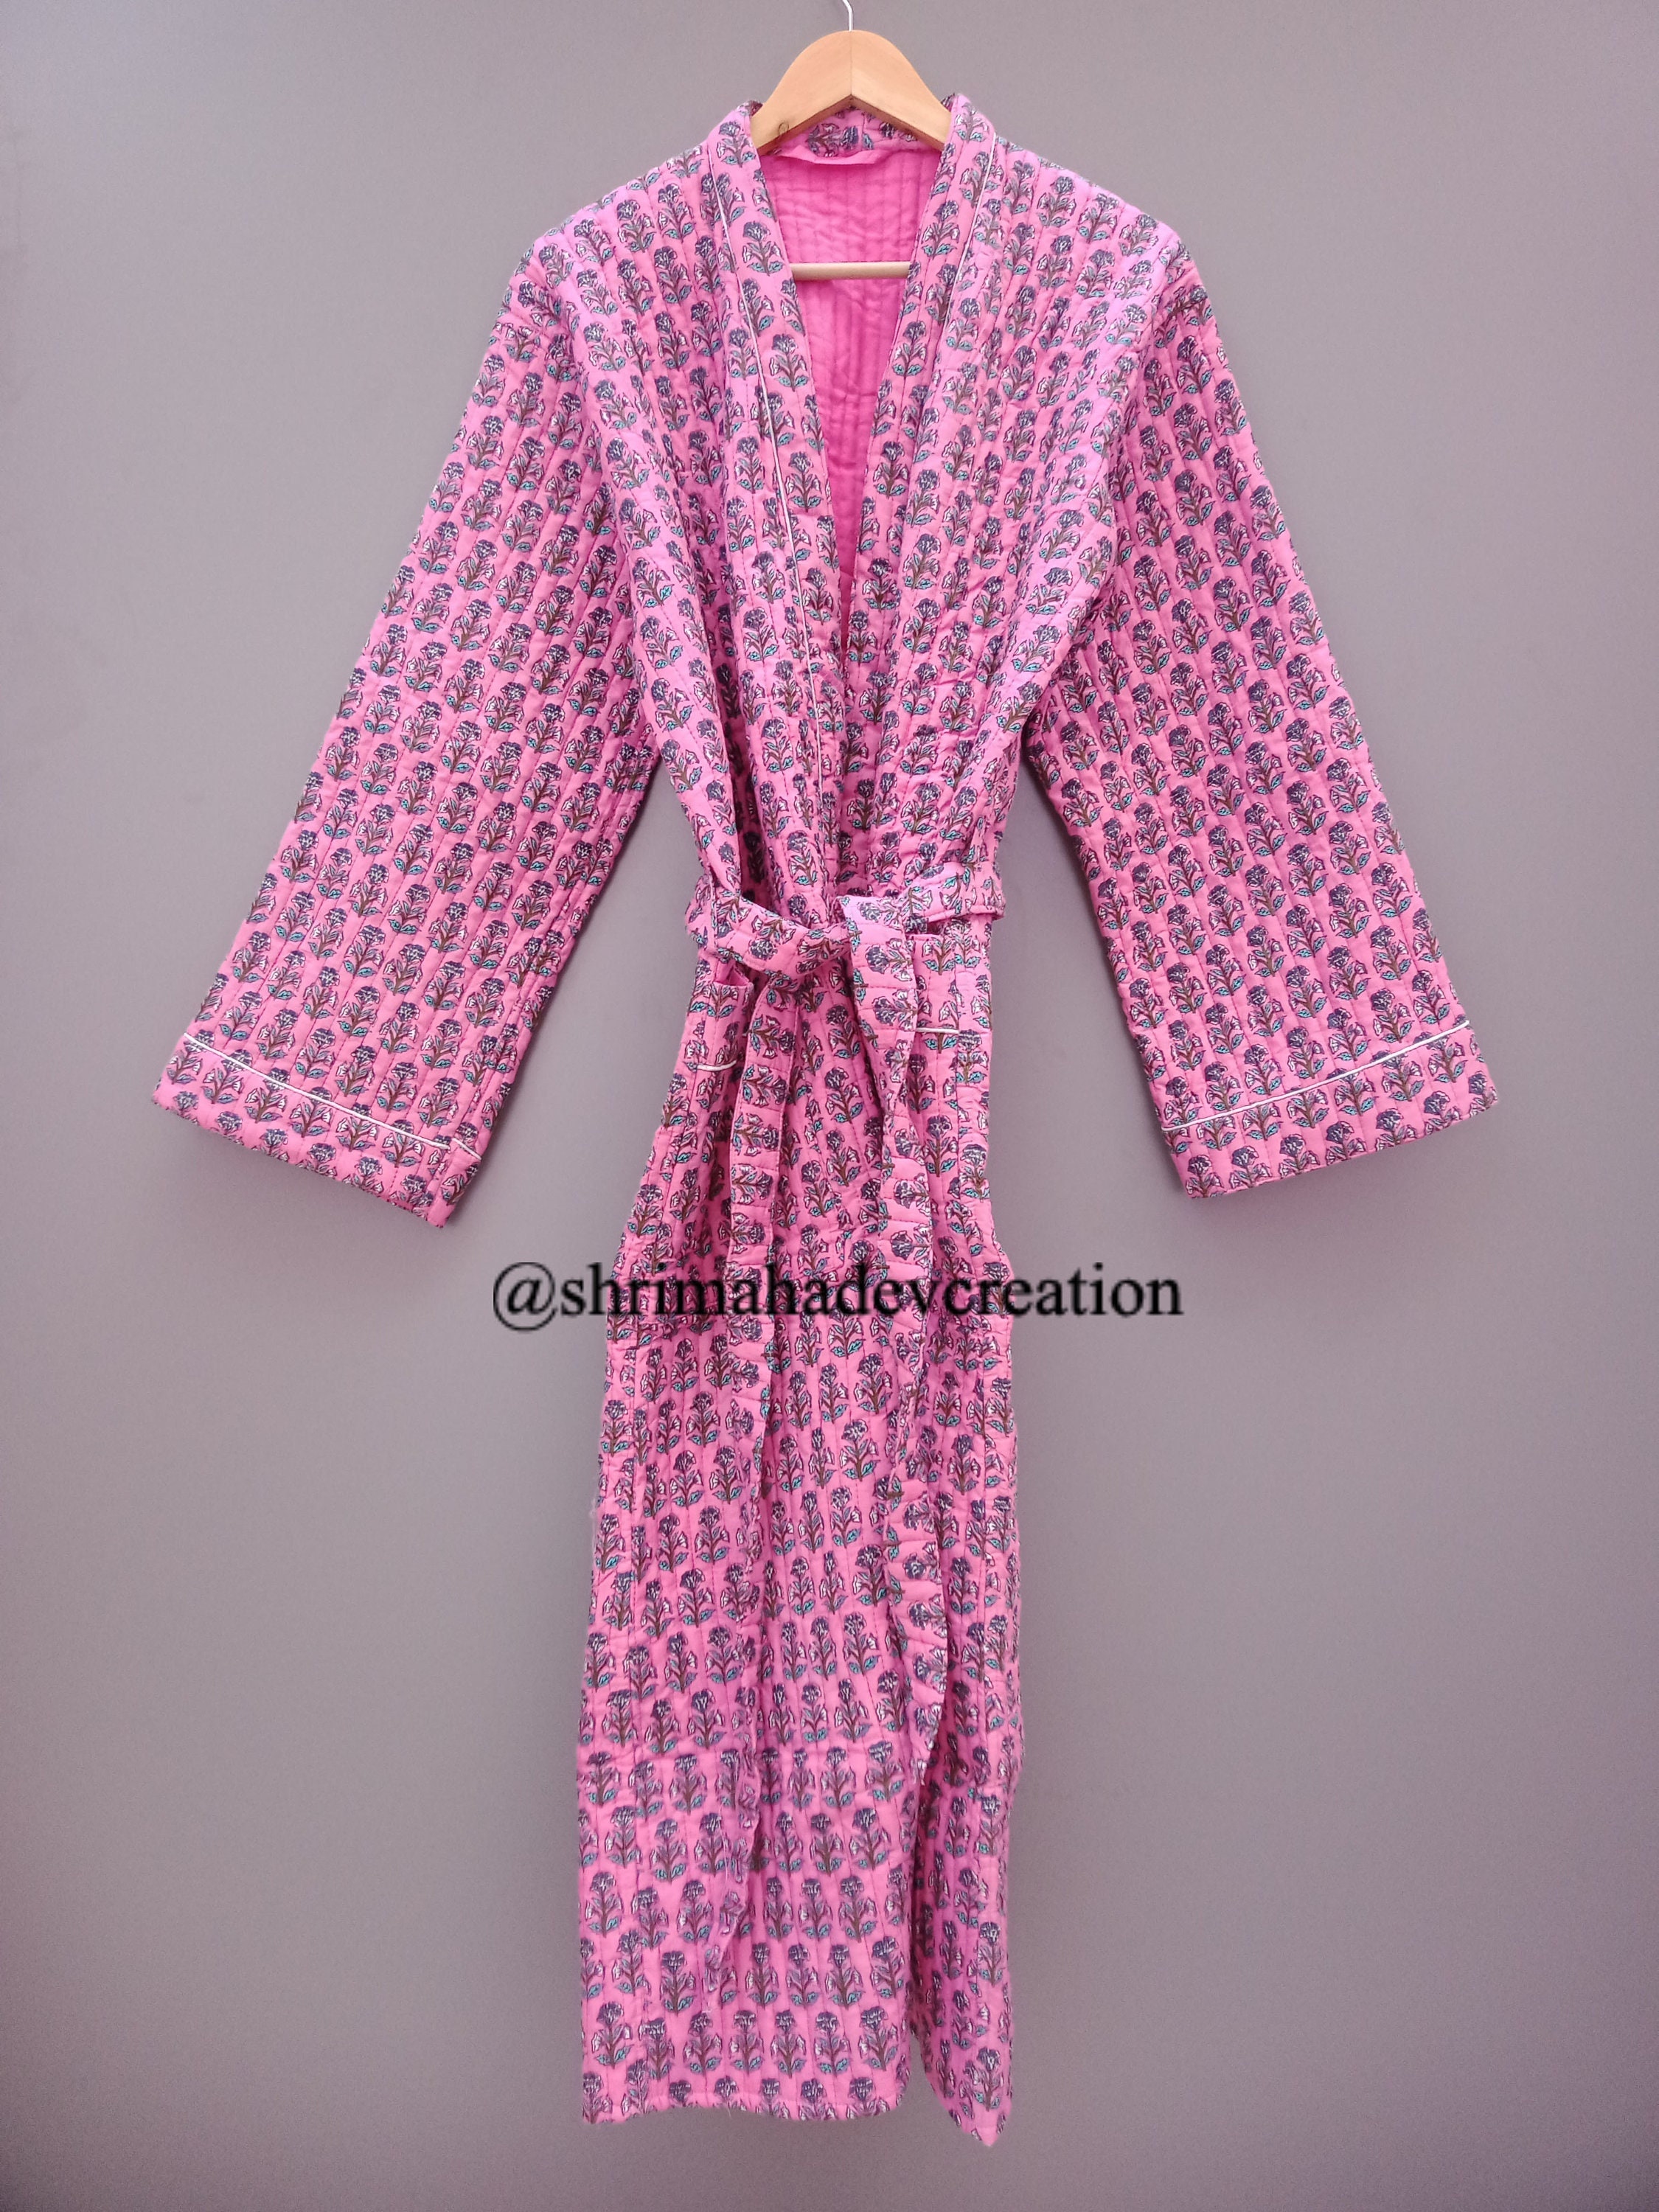 winter warm long jacket women wear cotton quilted robes Handmade cotton block printed bathrobe bridesmaid reversible quilted kimono